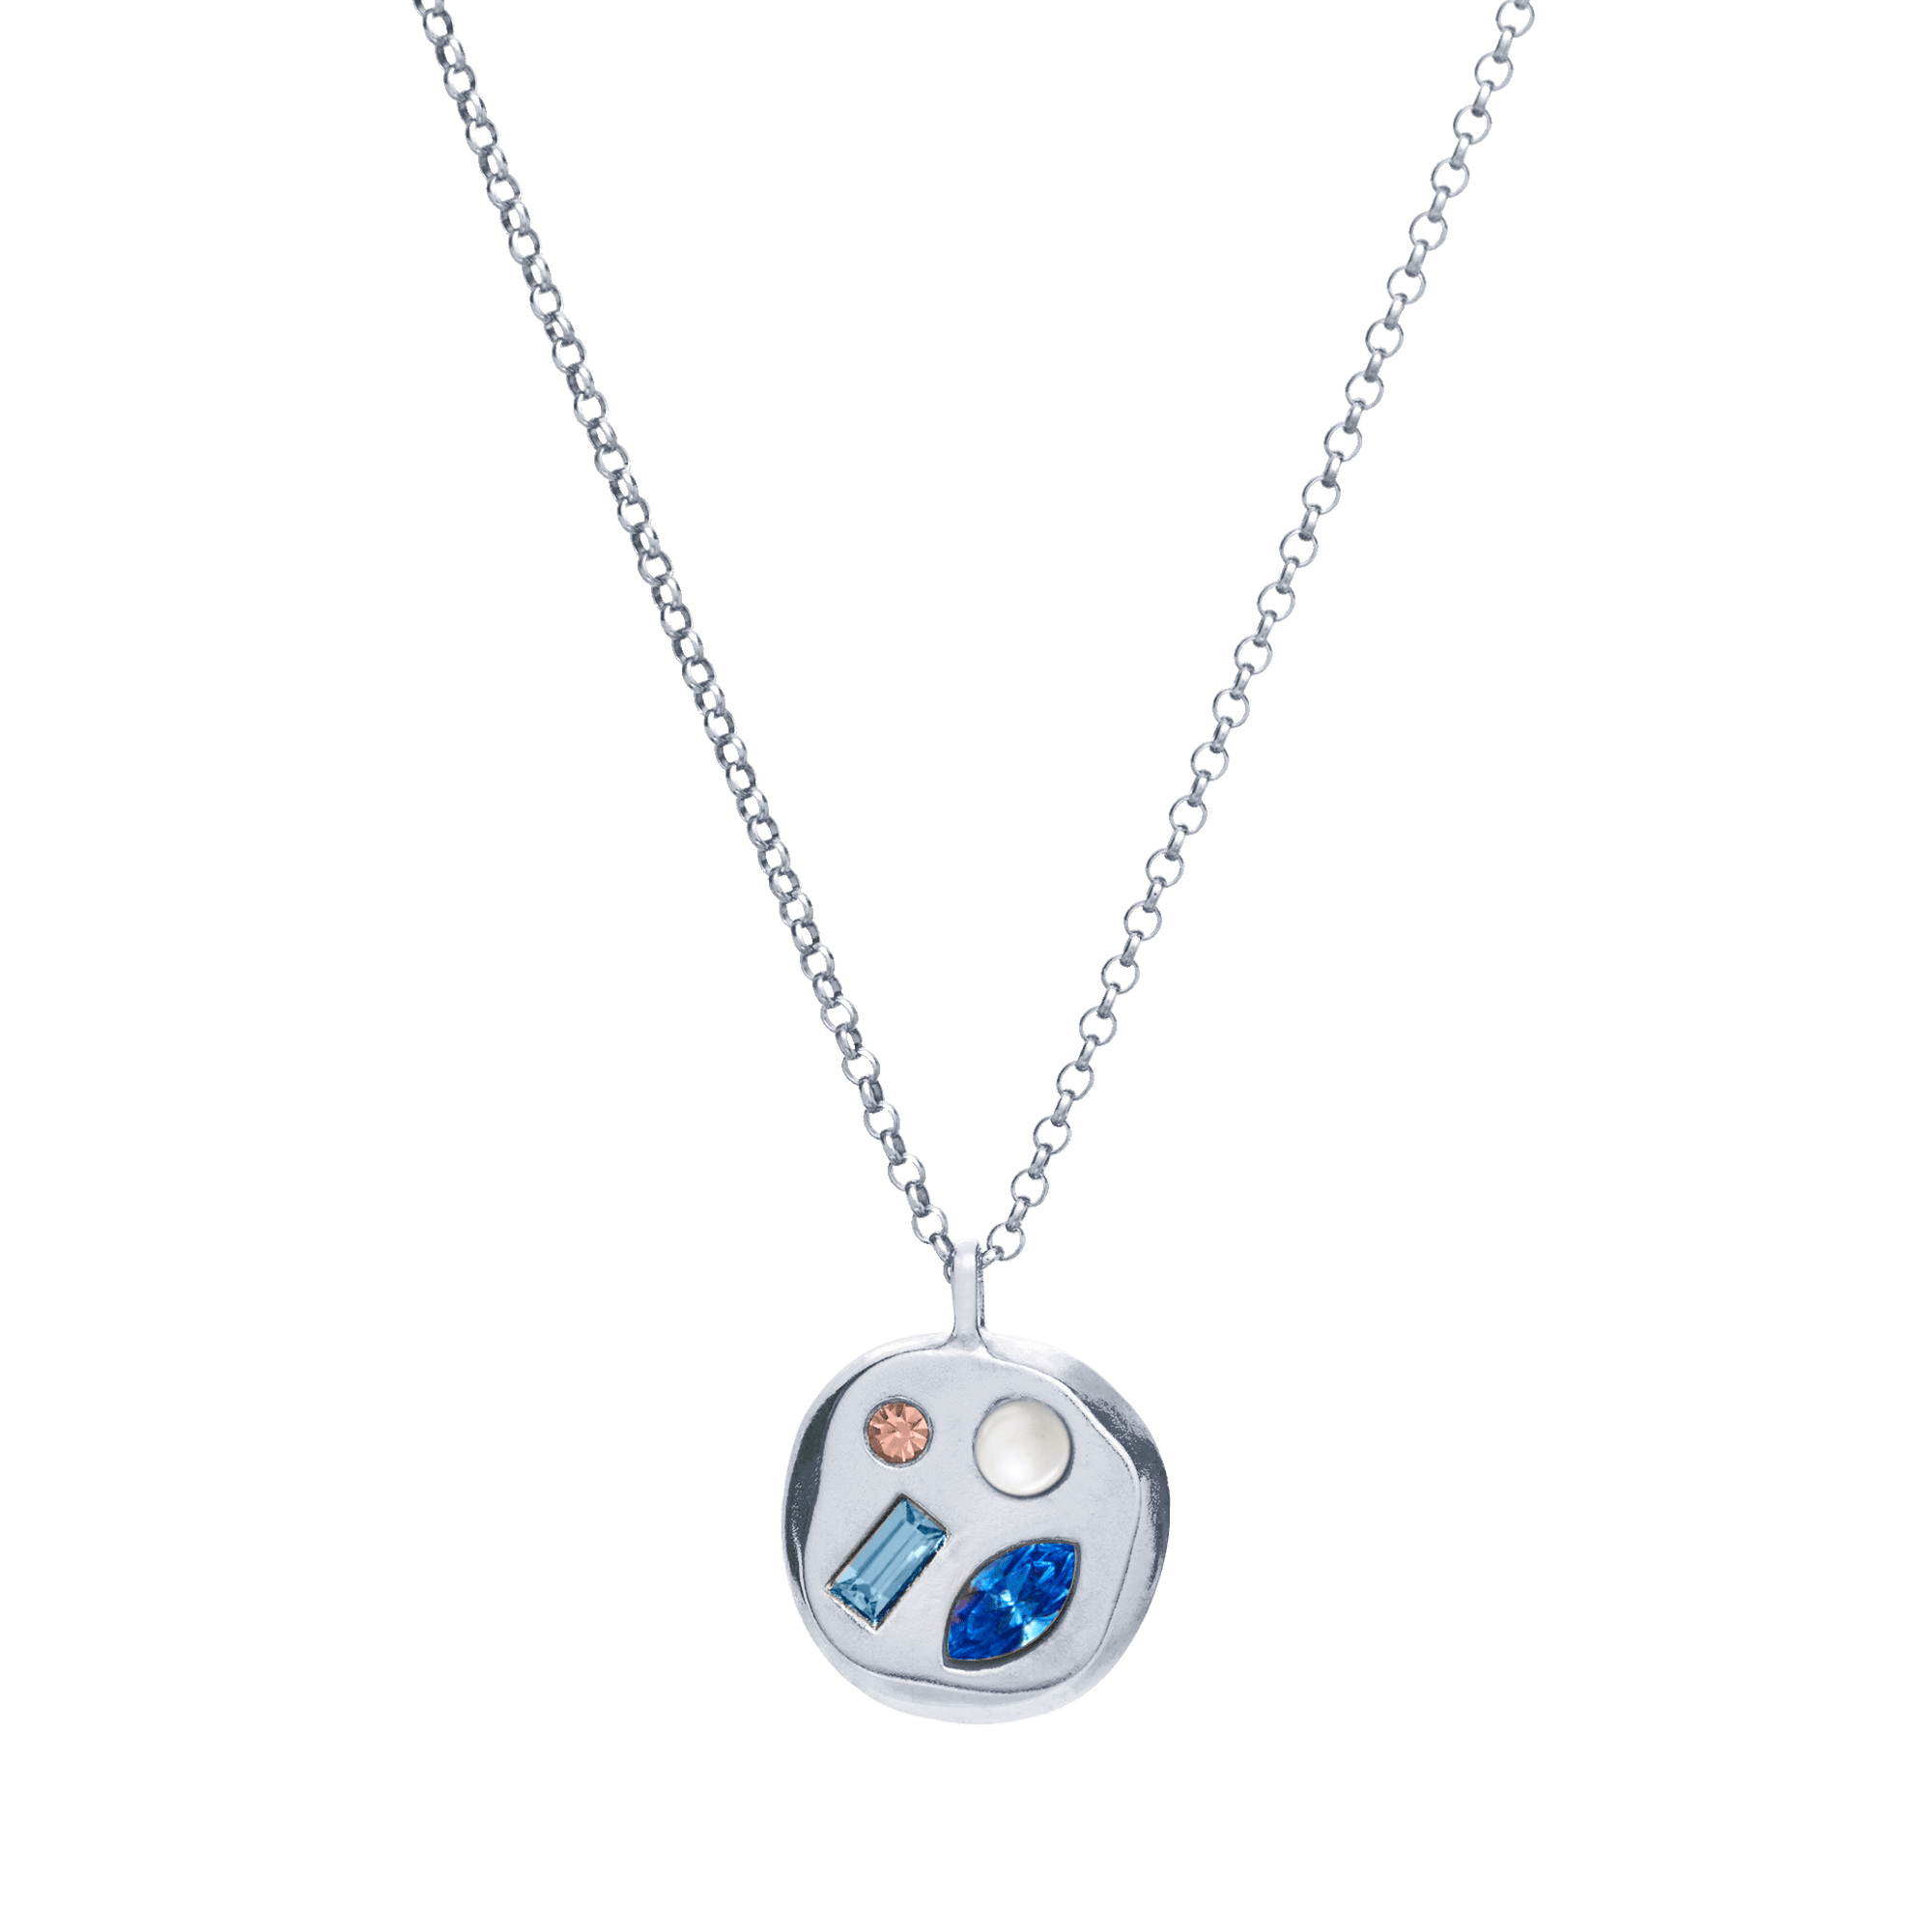 The September Seventeenth Pendant in Sterling Silver